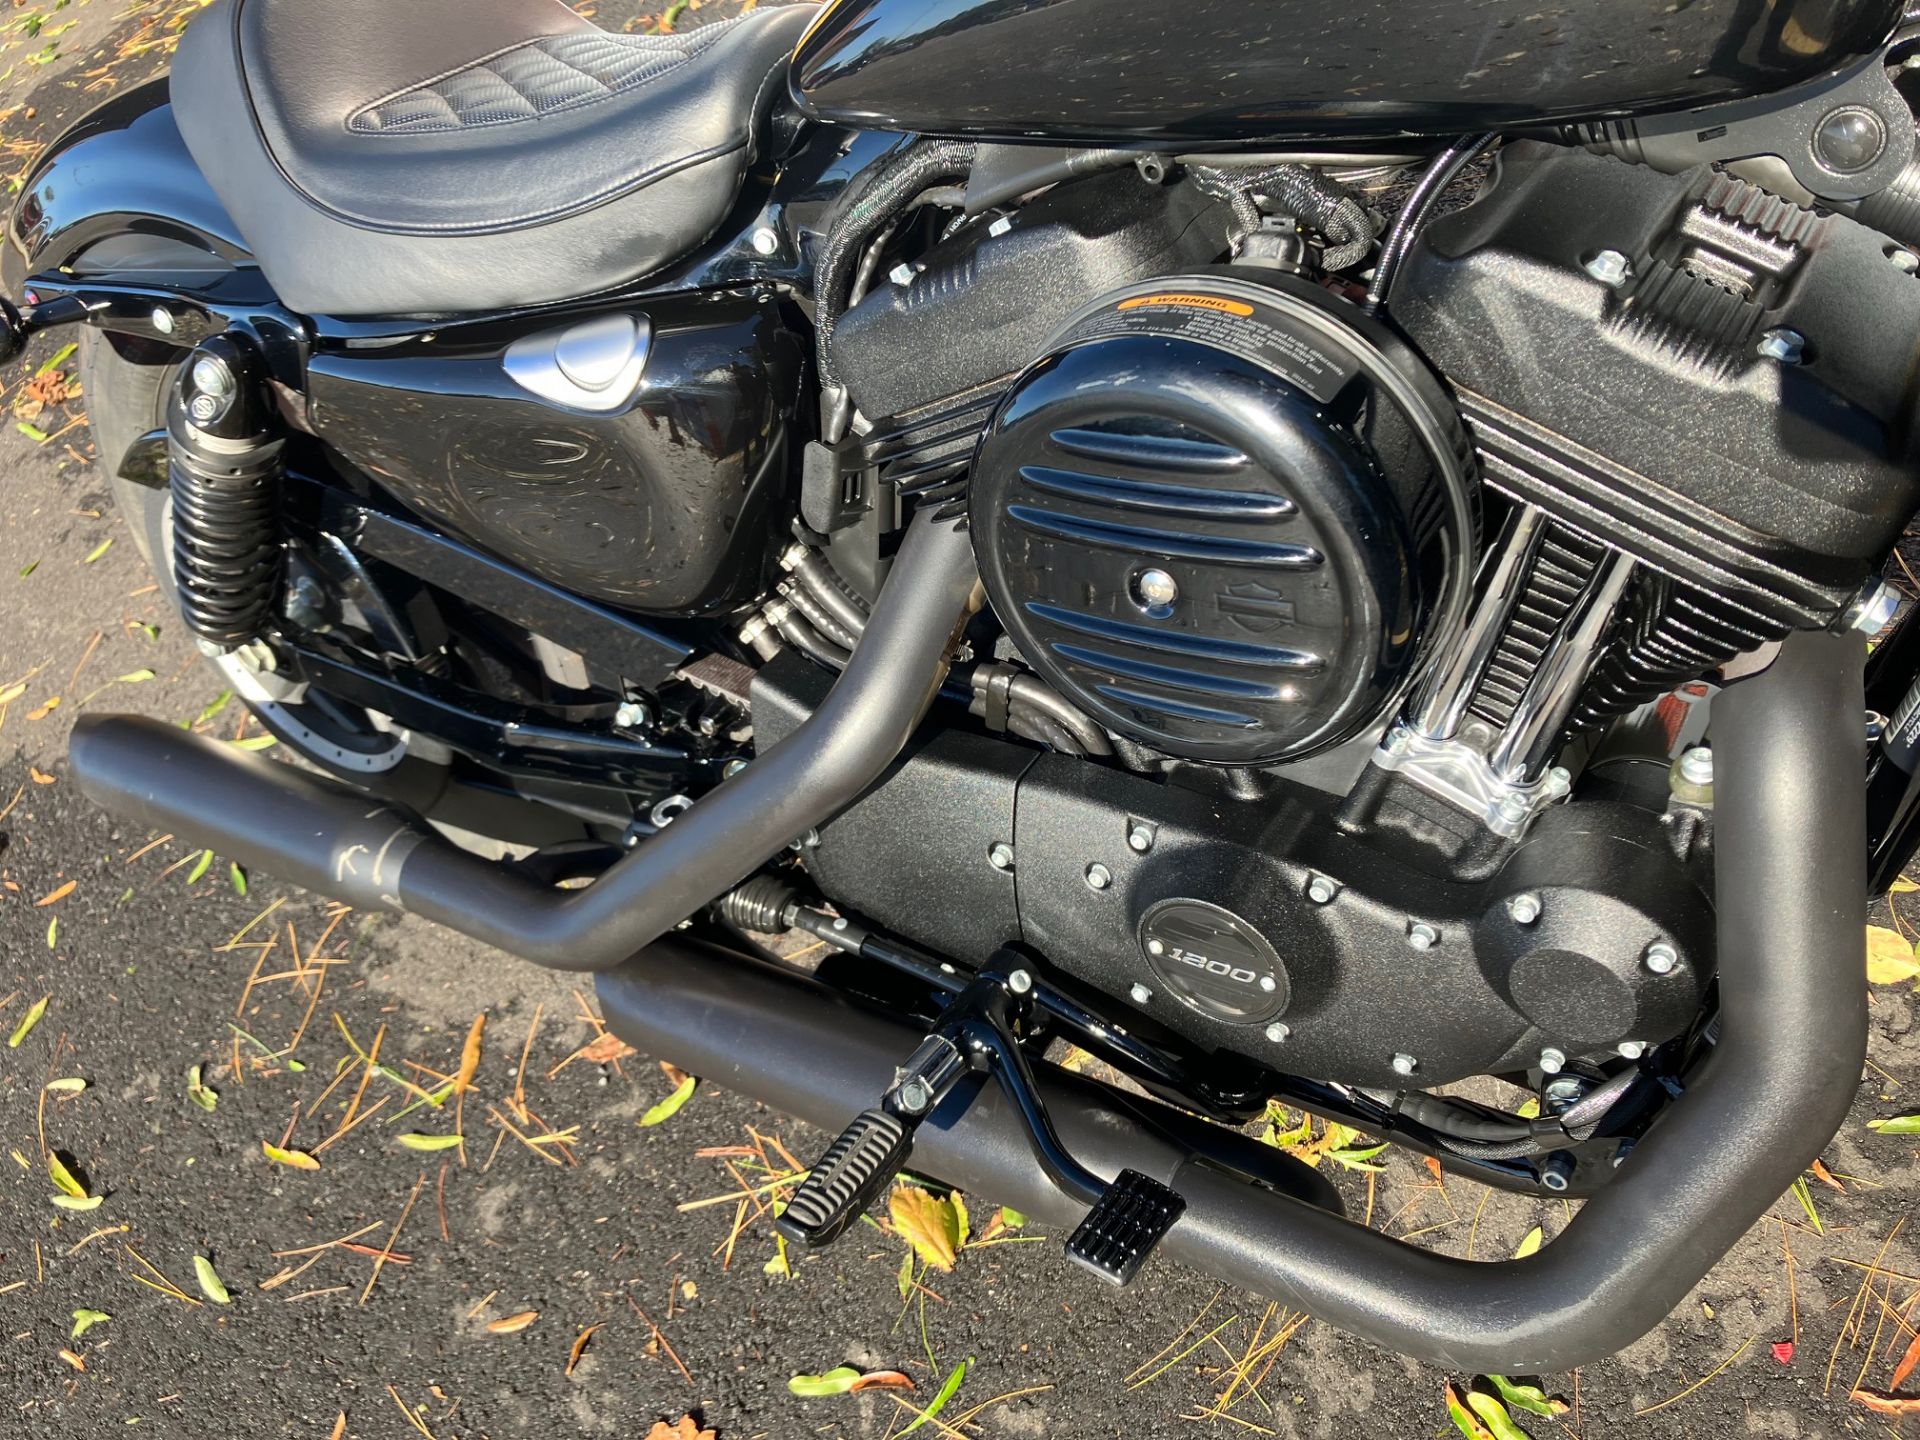 2019 Harley-Davidson IRON 1200 in West Long Branch, New Jersey - Photo 7